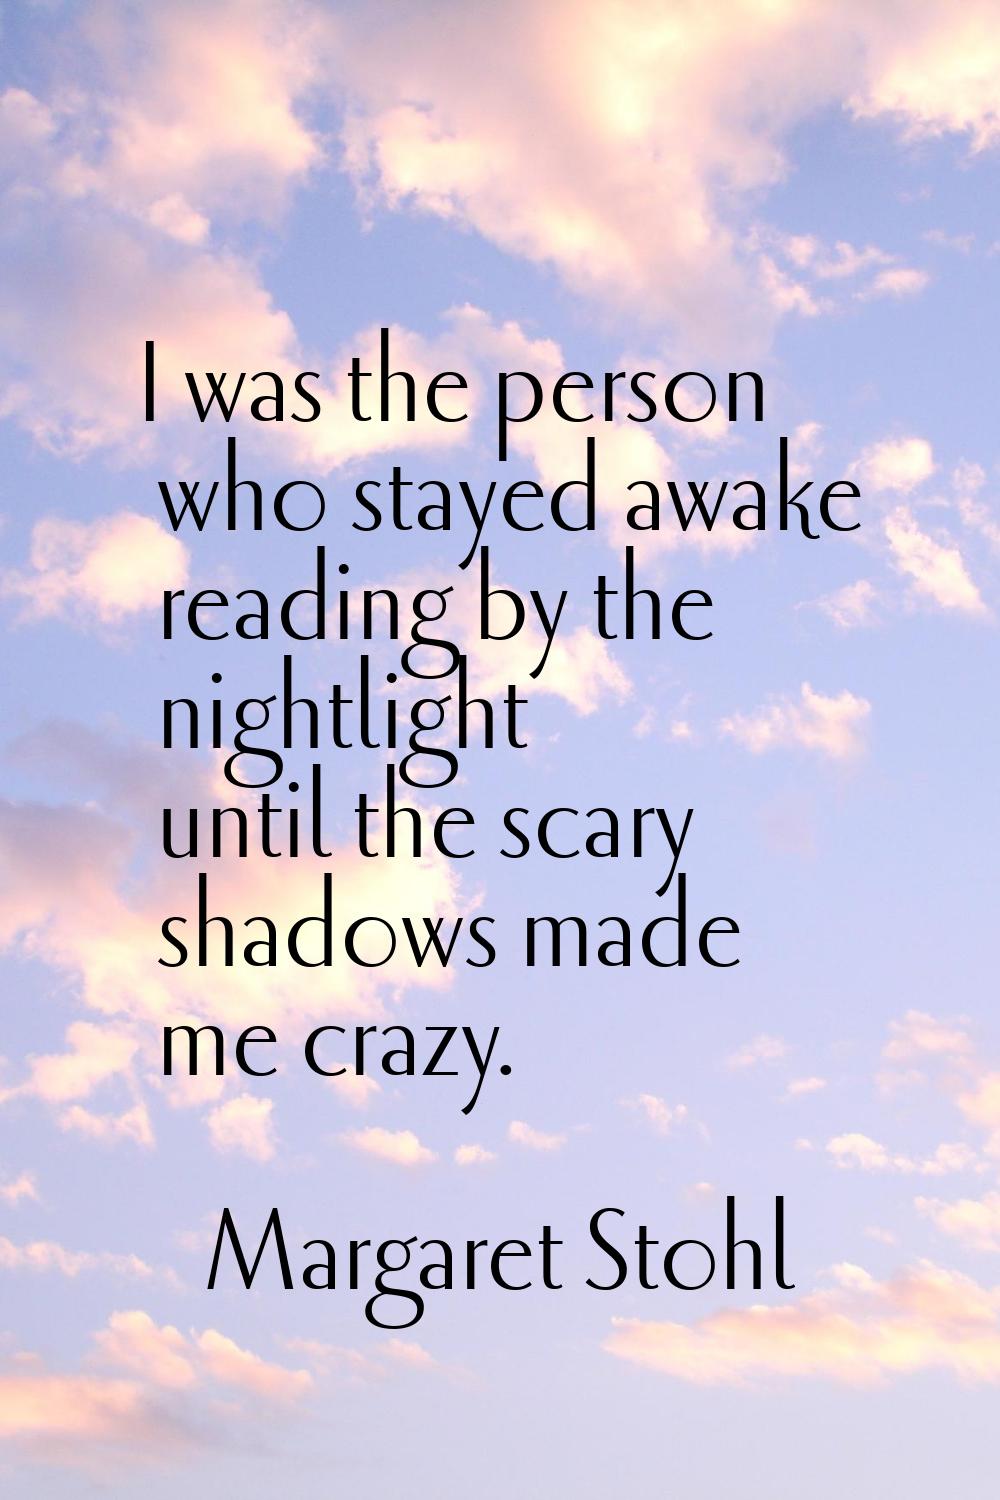 I was the person who stayed awake reading by the nightlight until the scary shadows made me crazy.